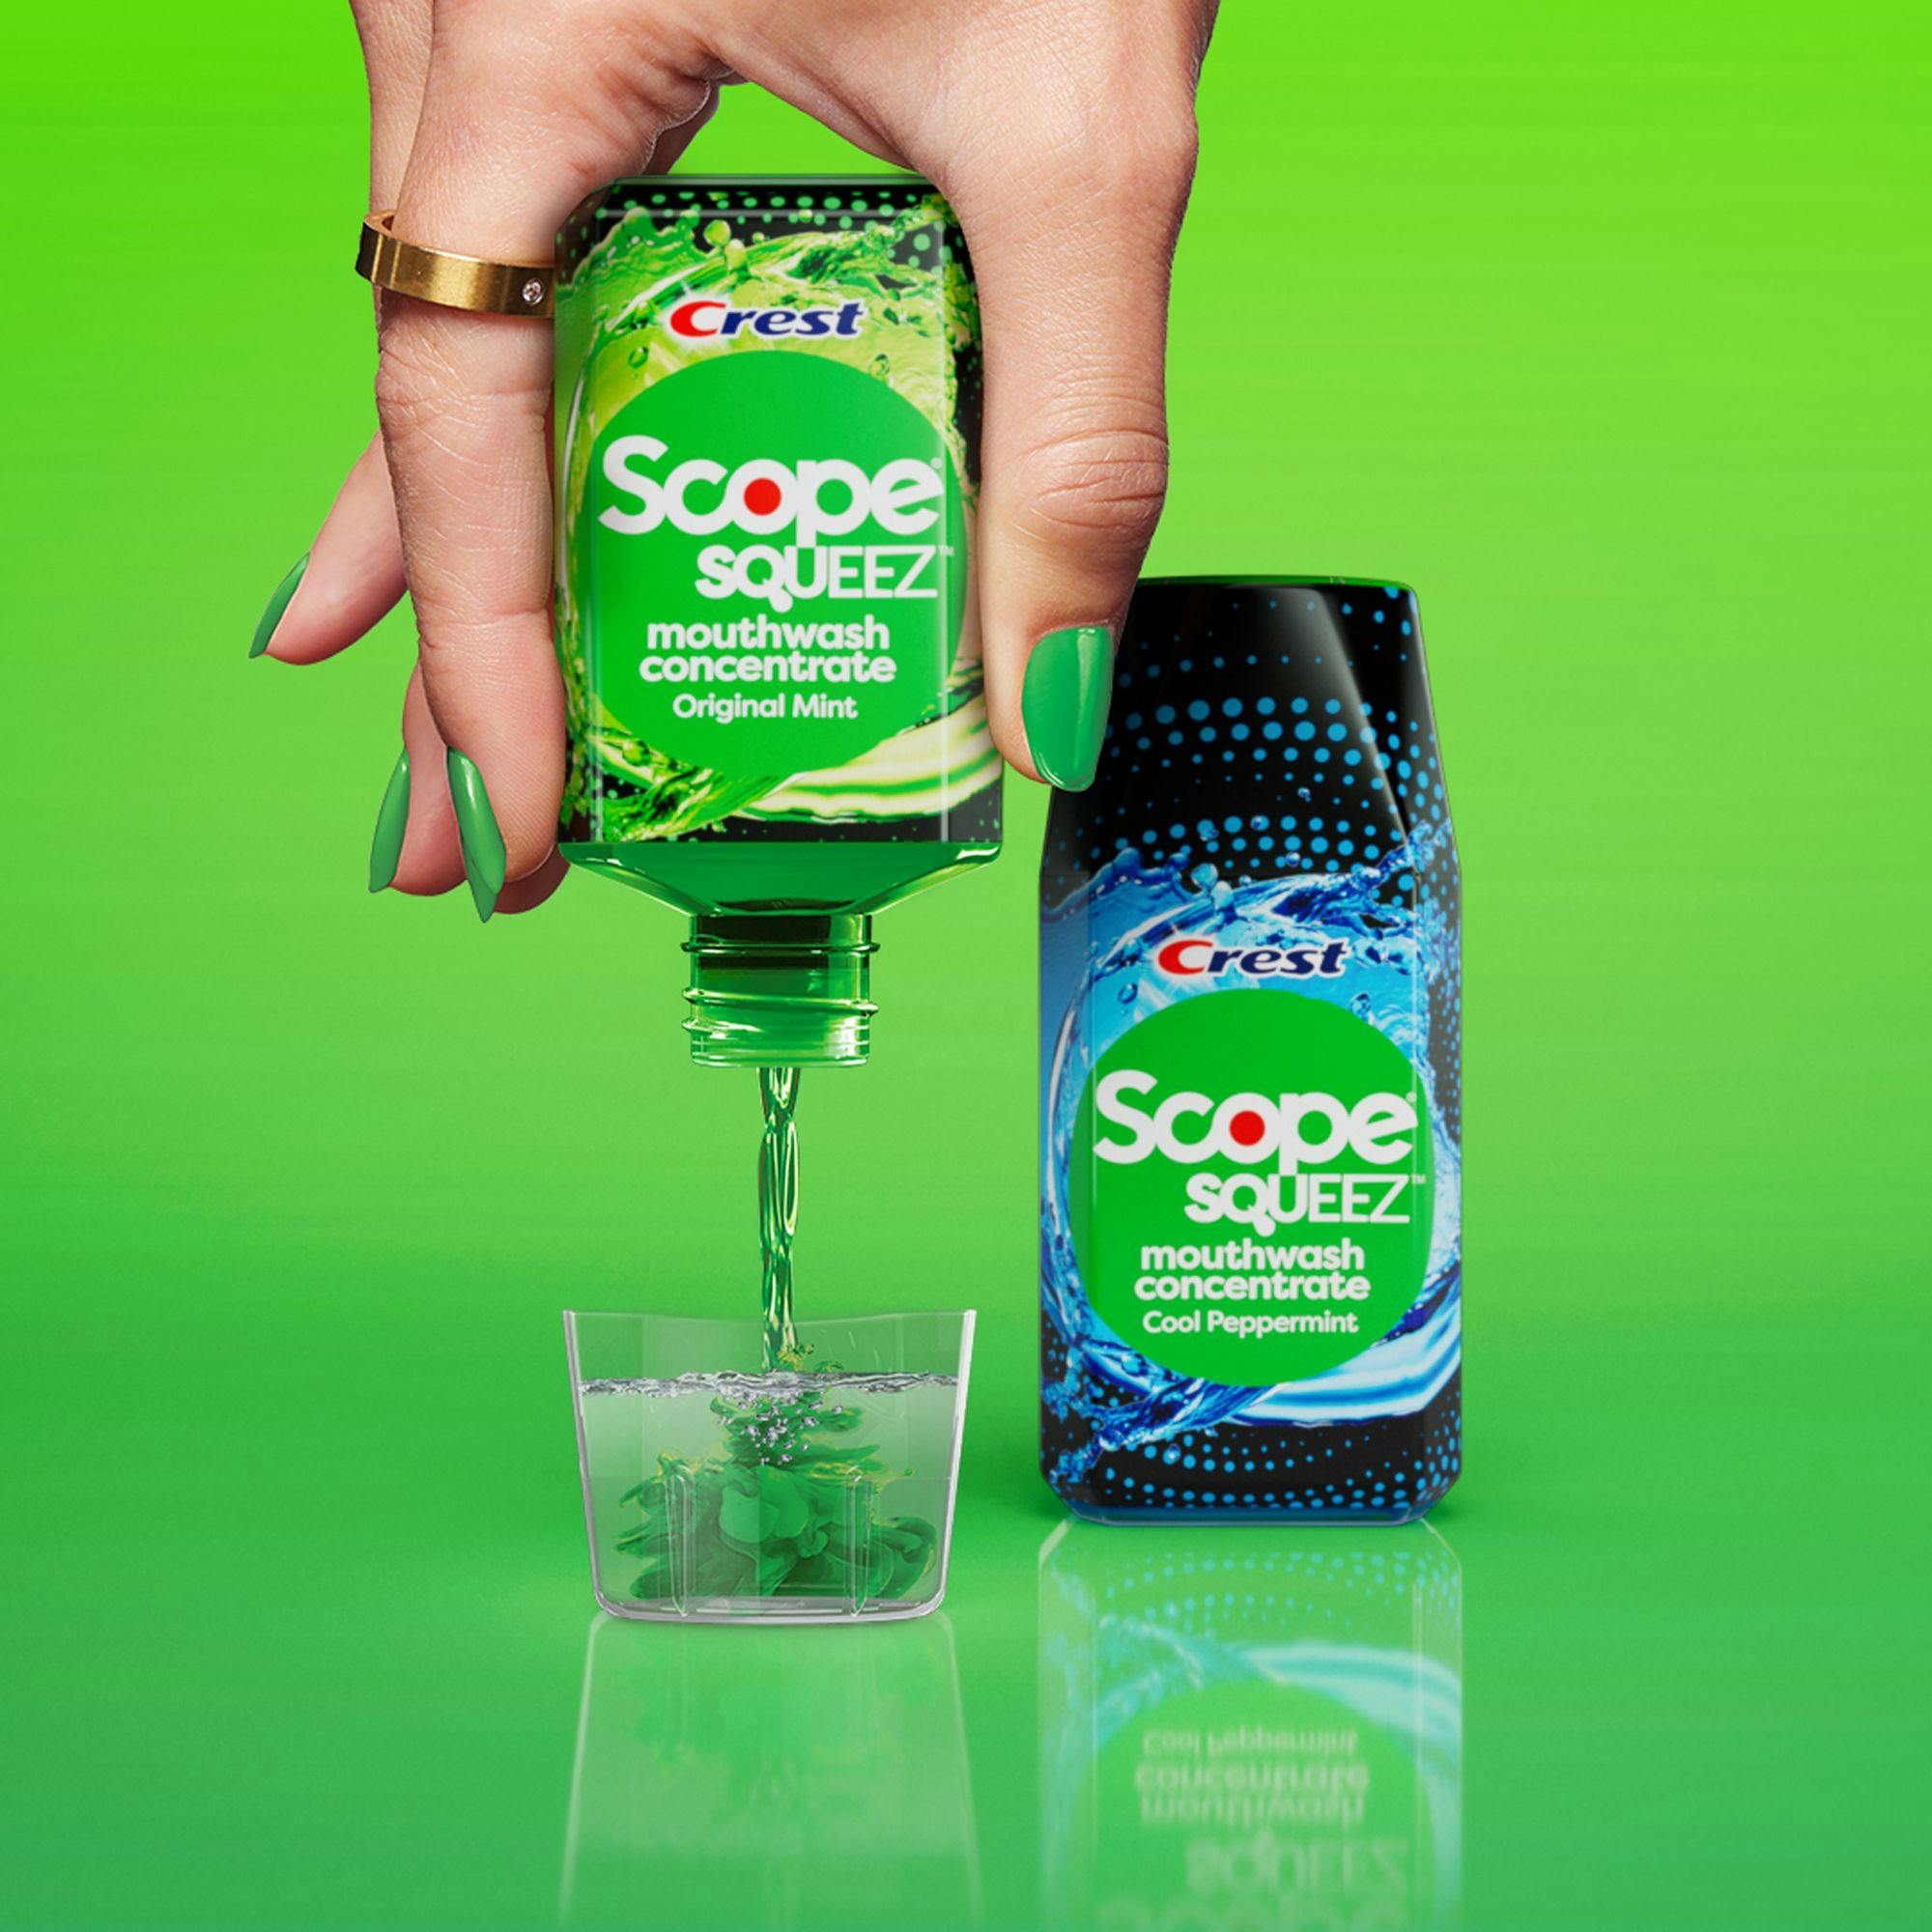 Scope Launches Scope Squeez Mouthwash Concentrate